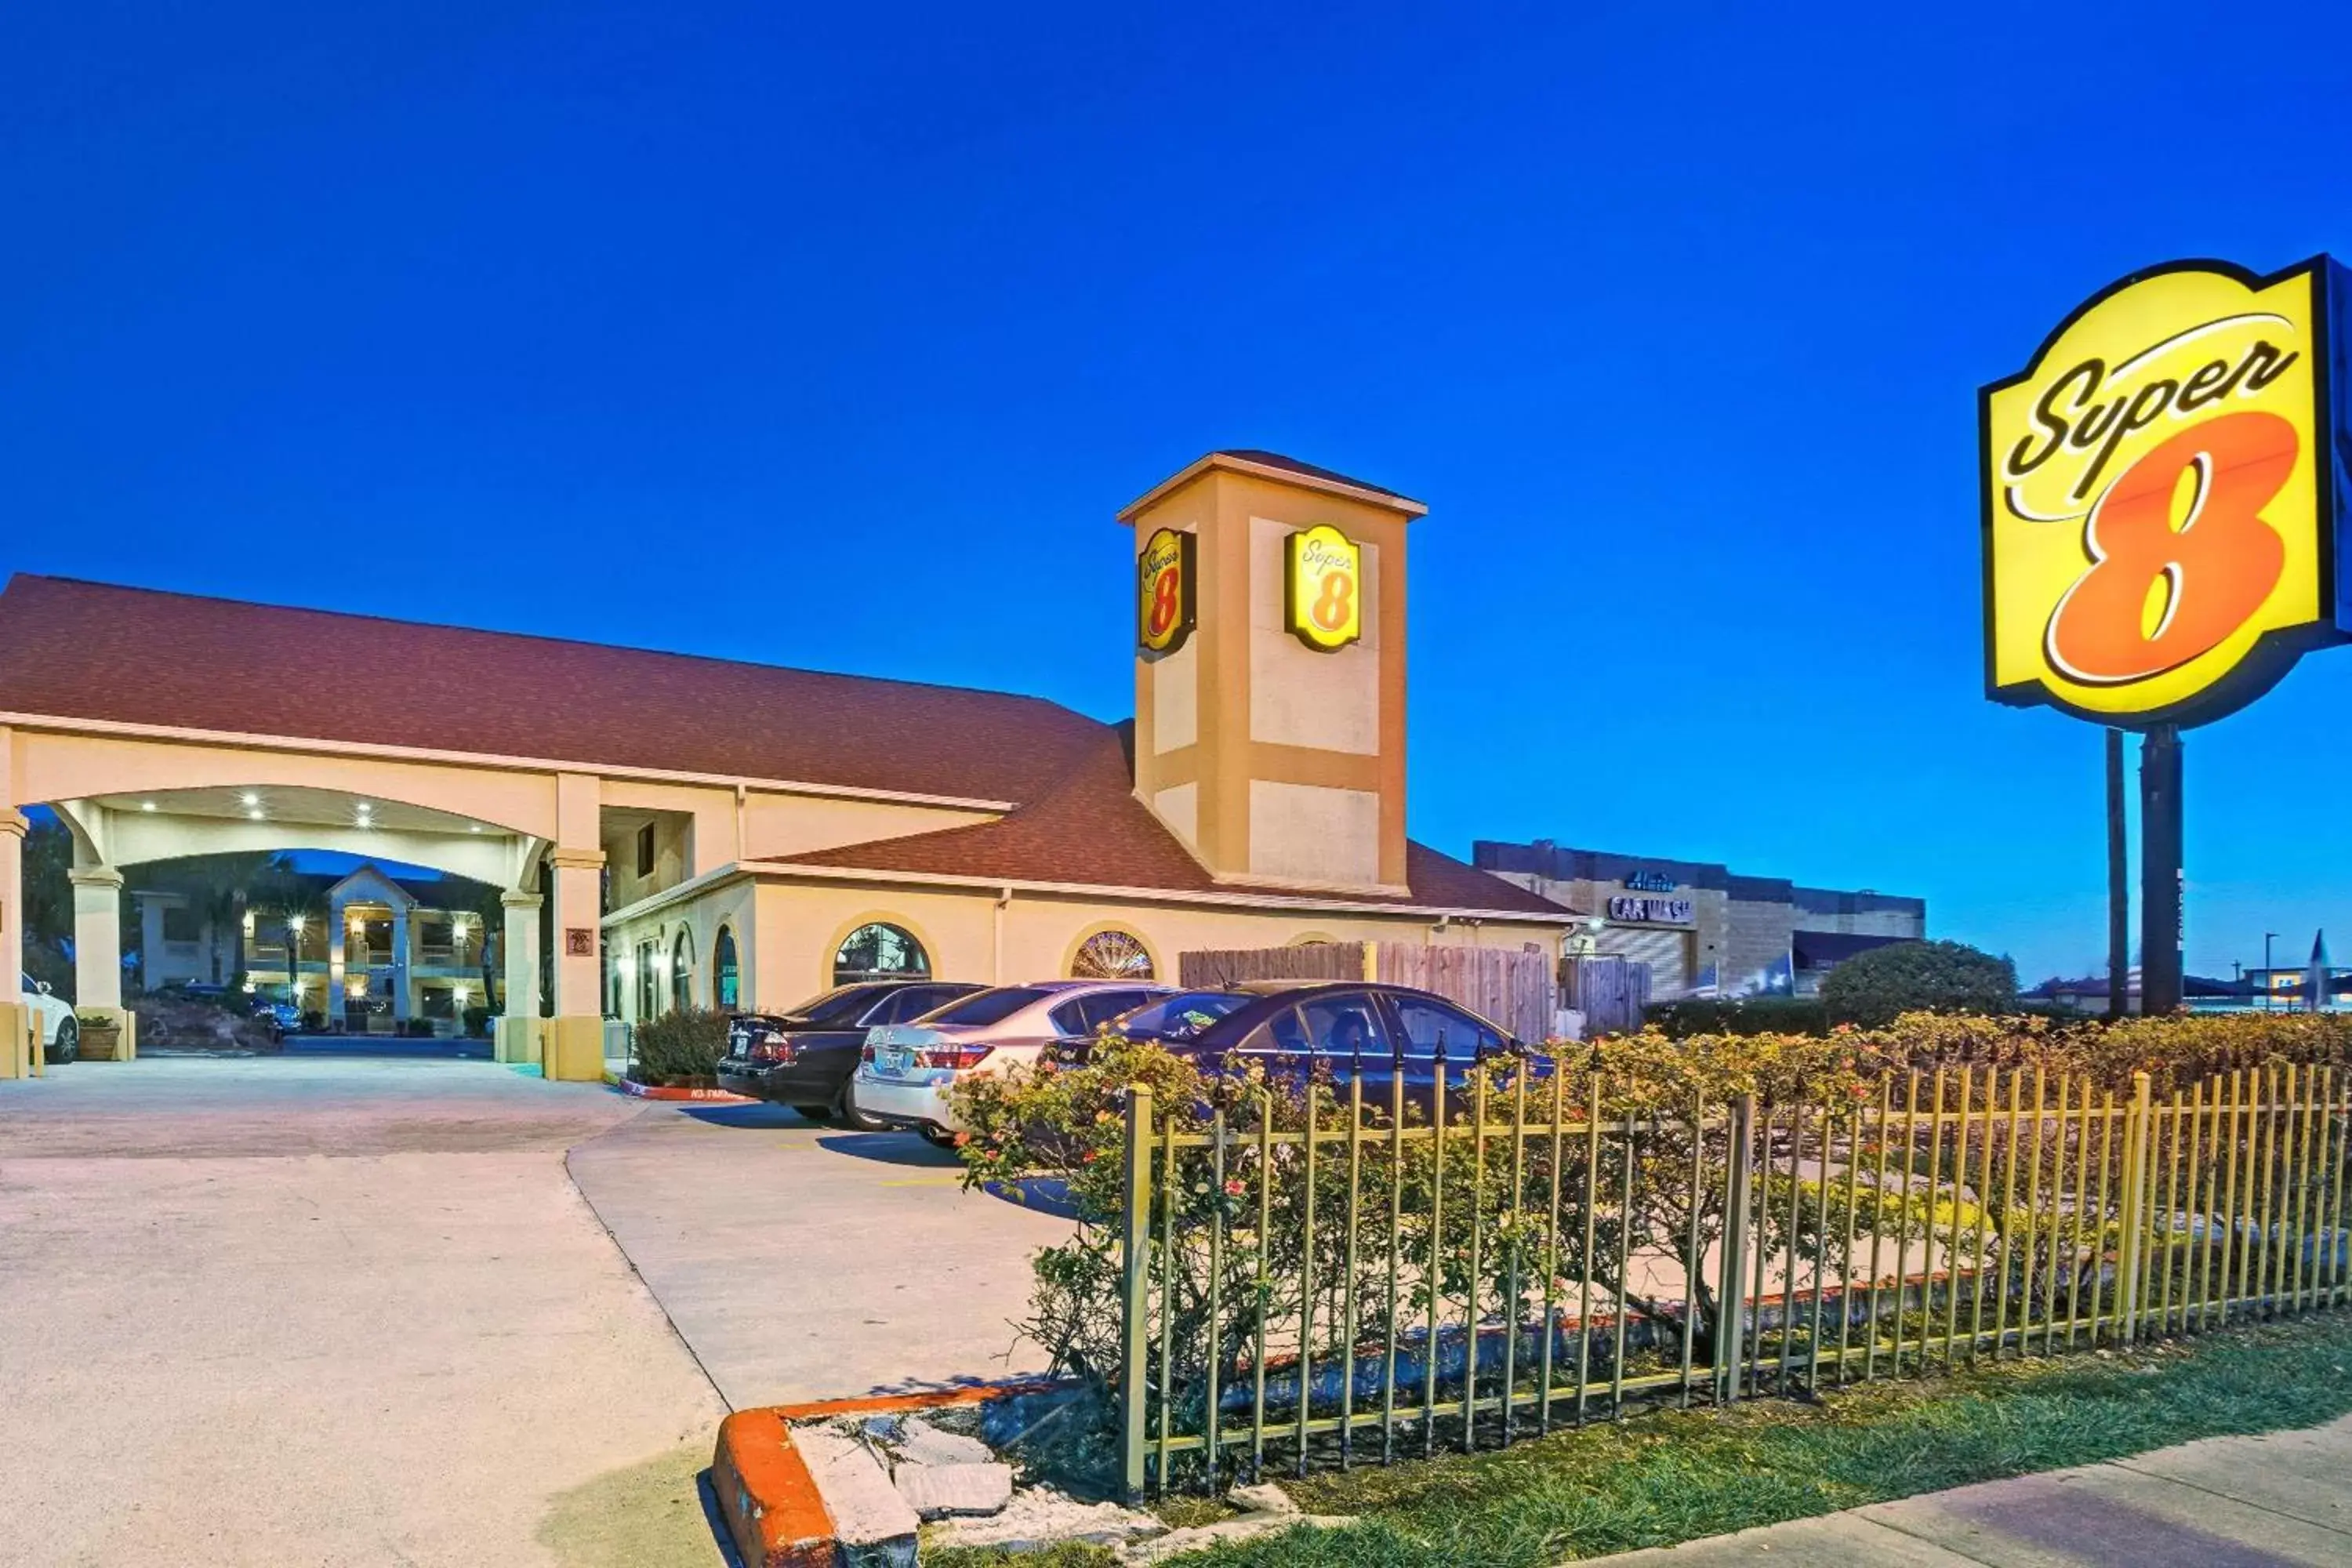 Property Building in Super 8 by Wyndham Houston Hobby Airport South